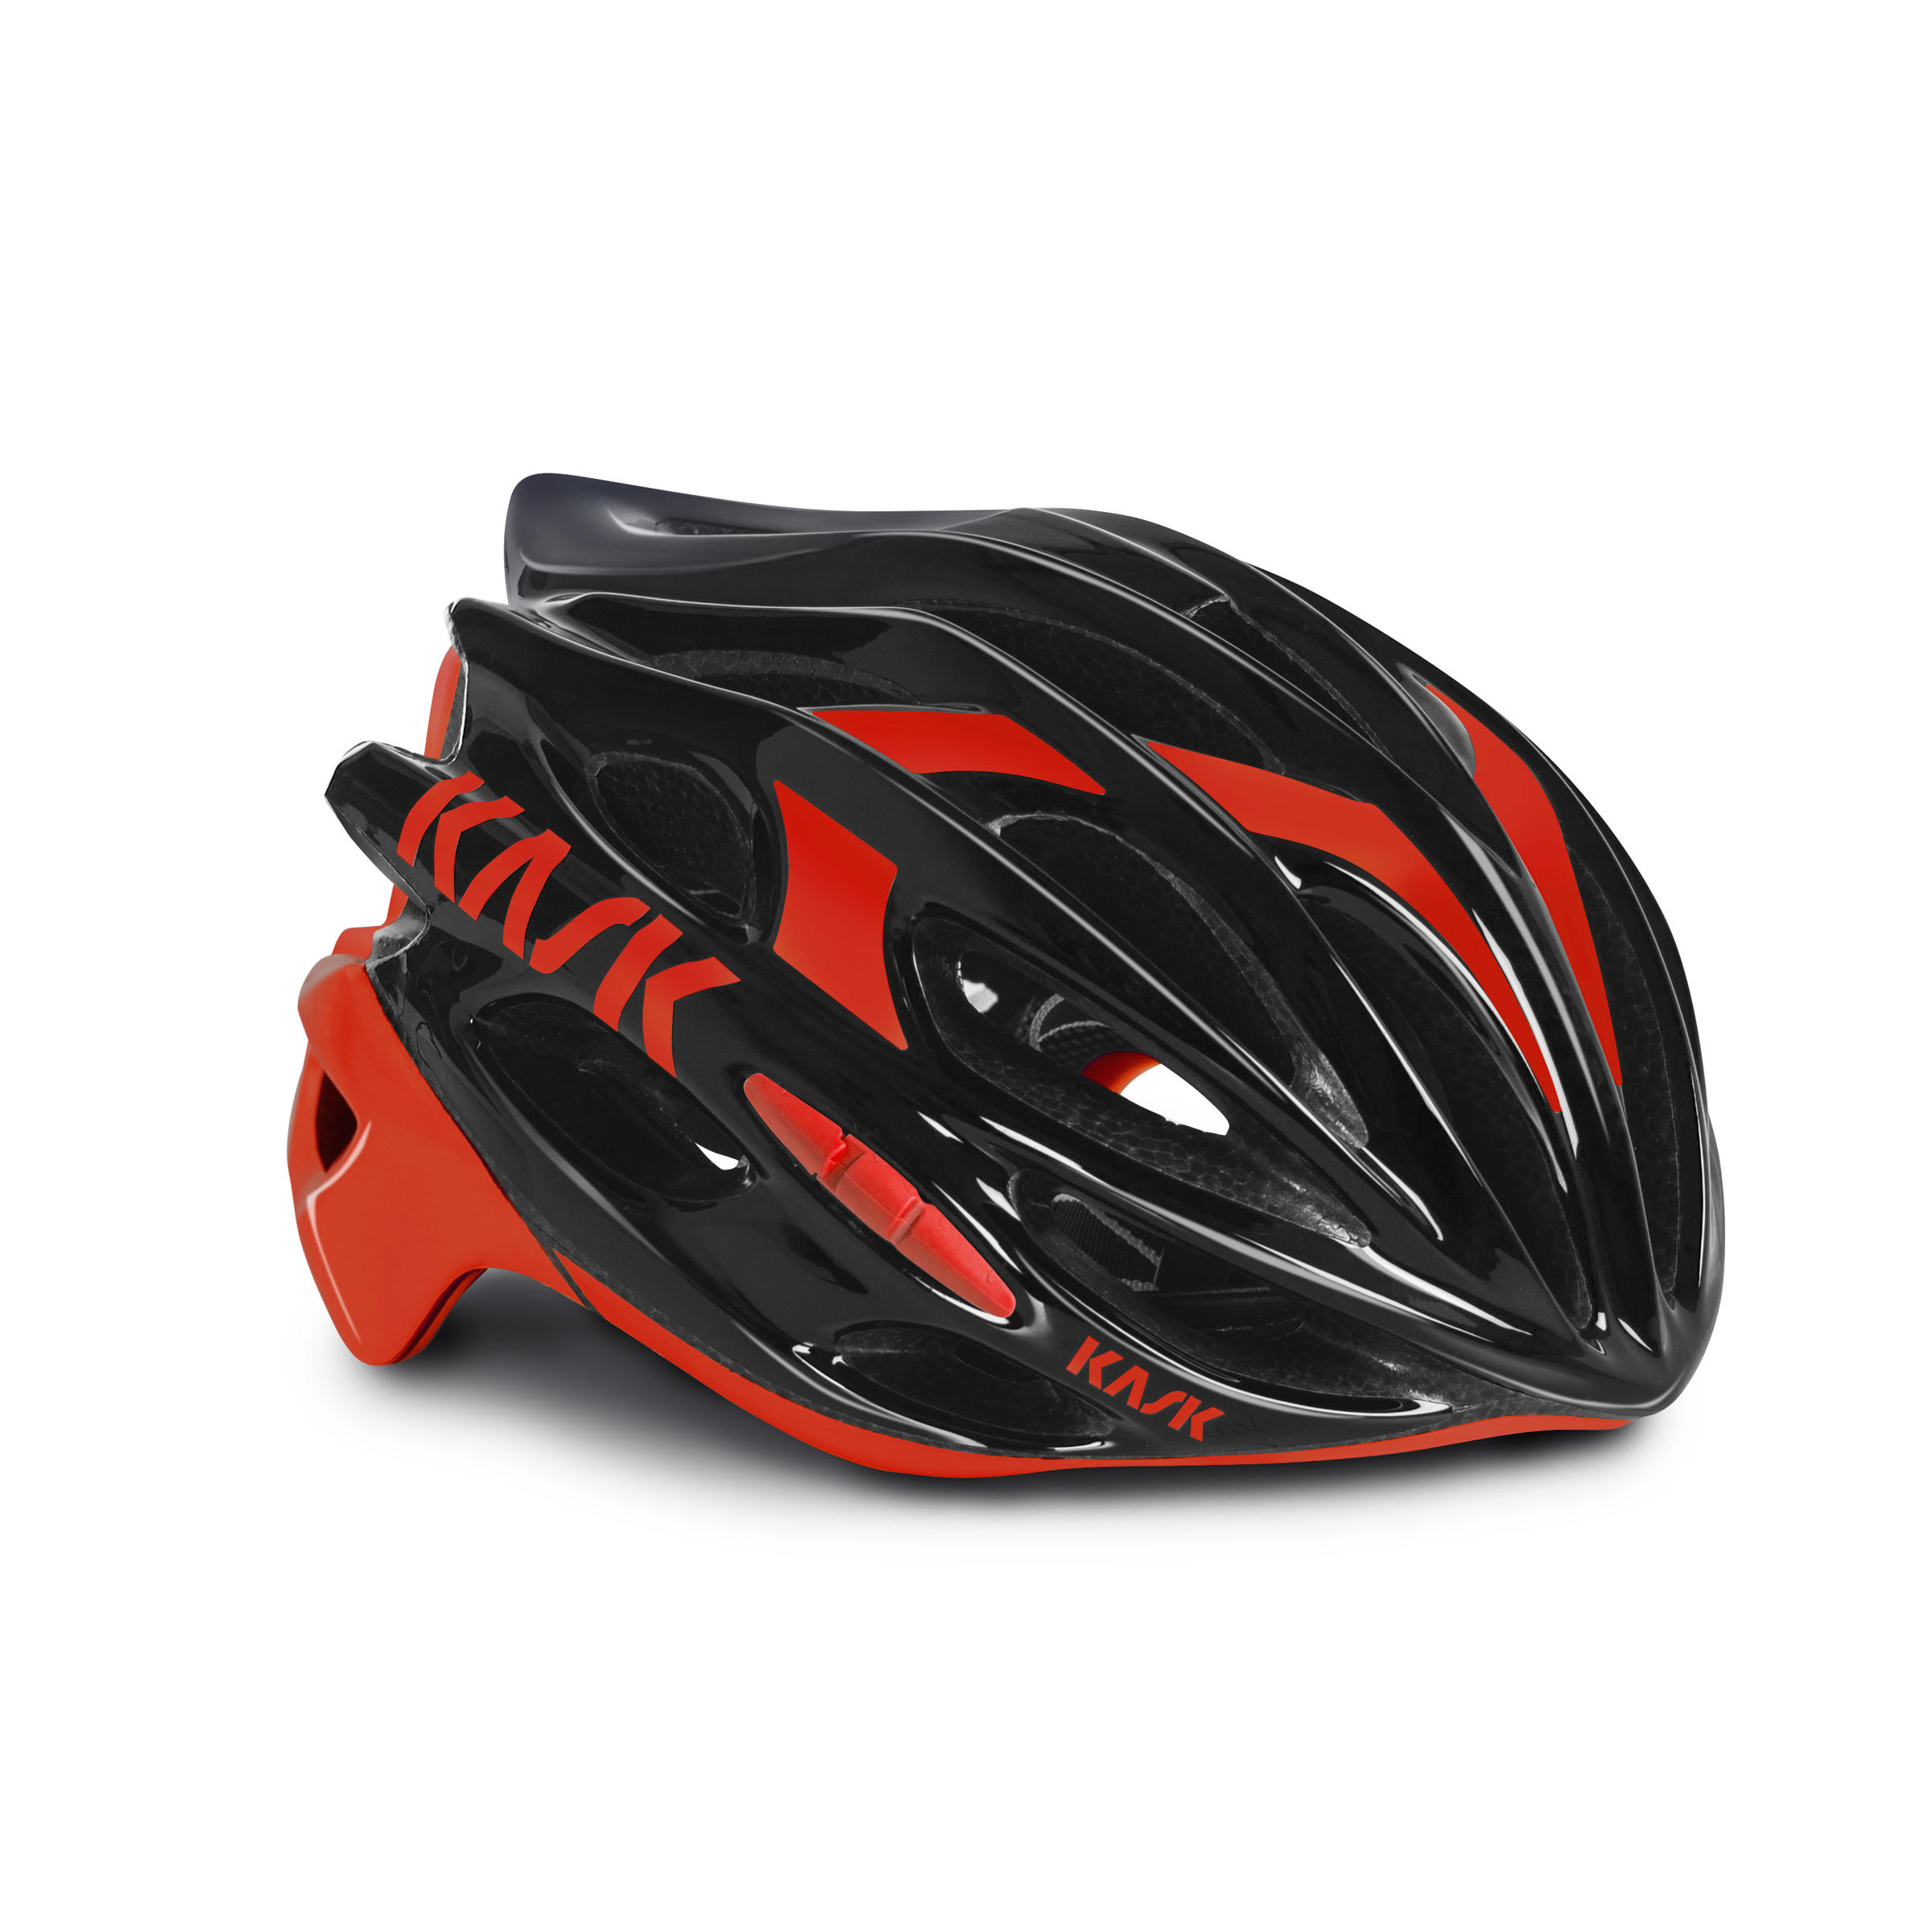 KASK Mojito - The Bike Zone | Shop Online or In-Store